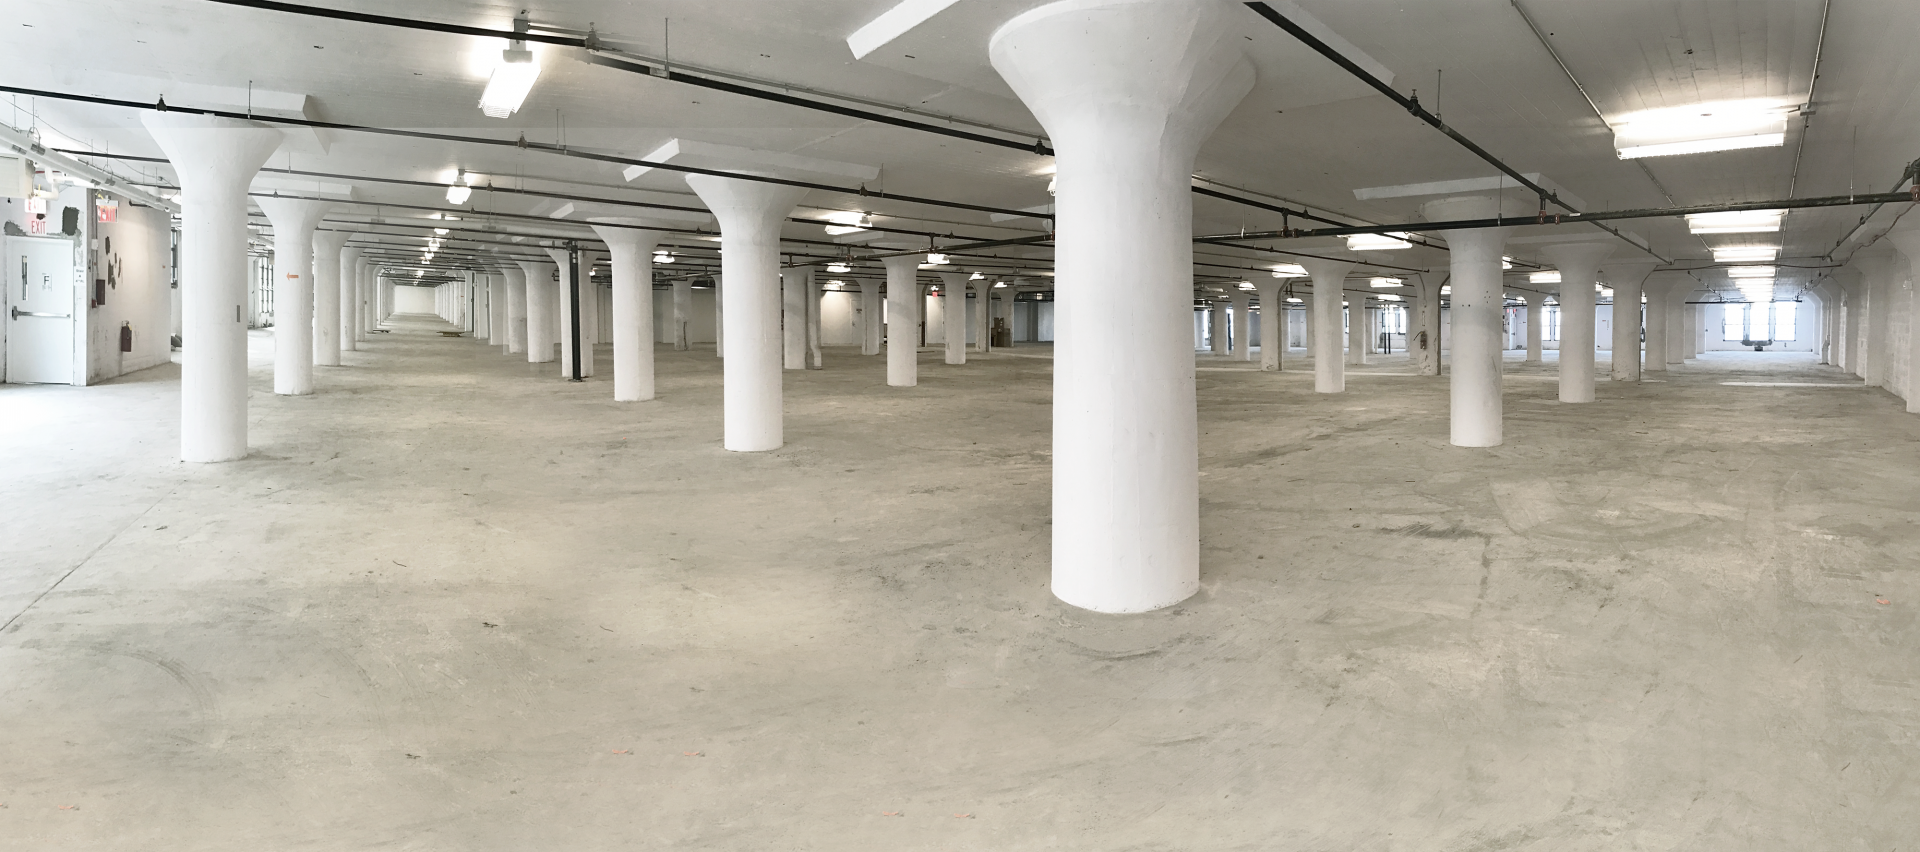 Interior spaces after the building modernization of Brooklyn Army Terminal Building A